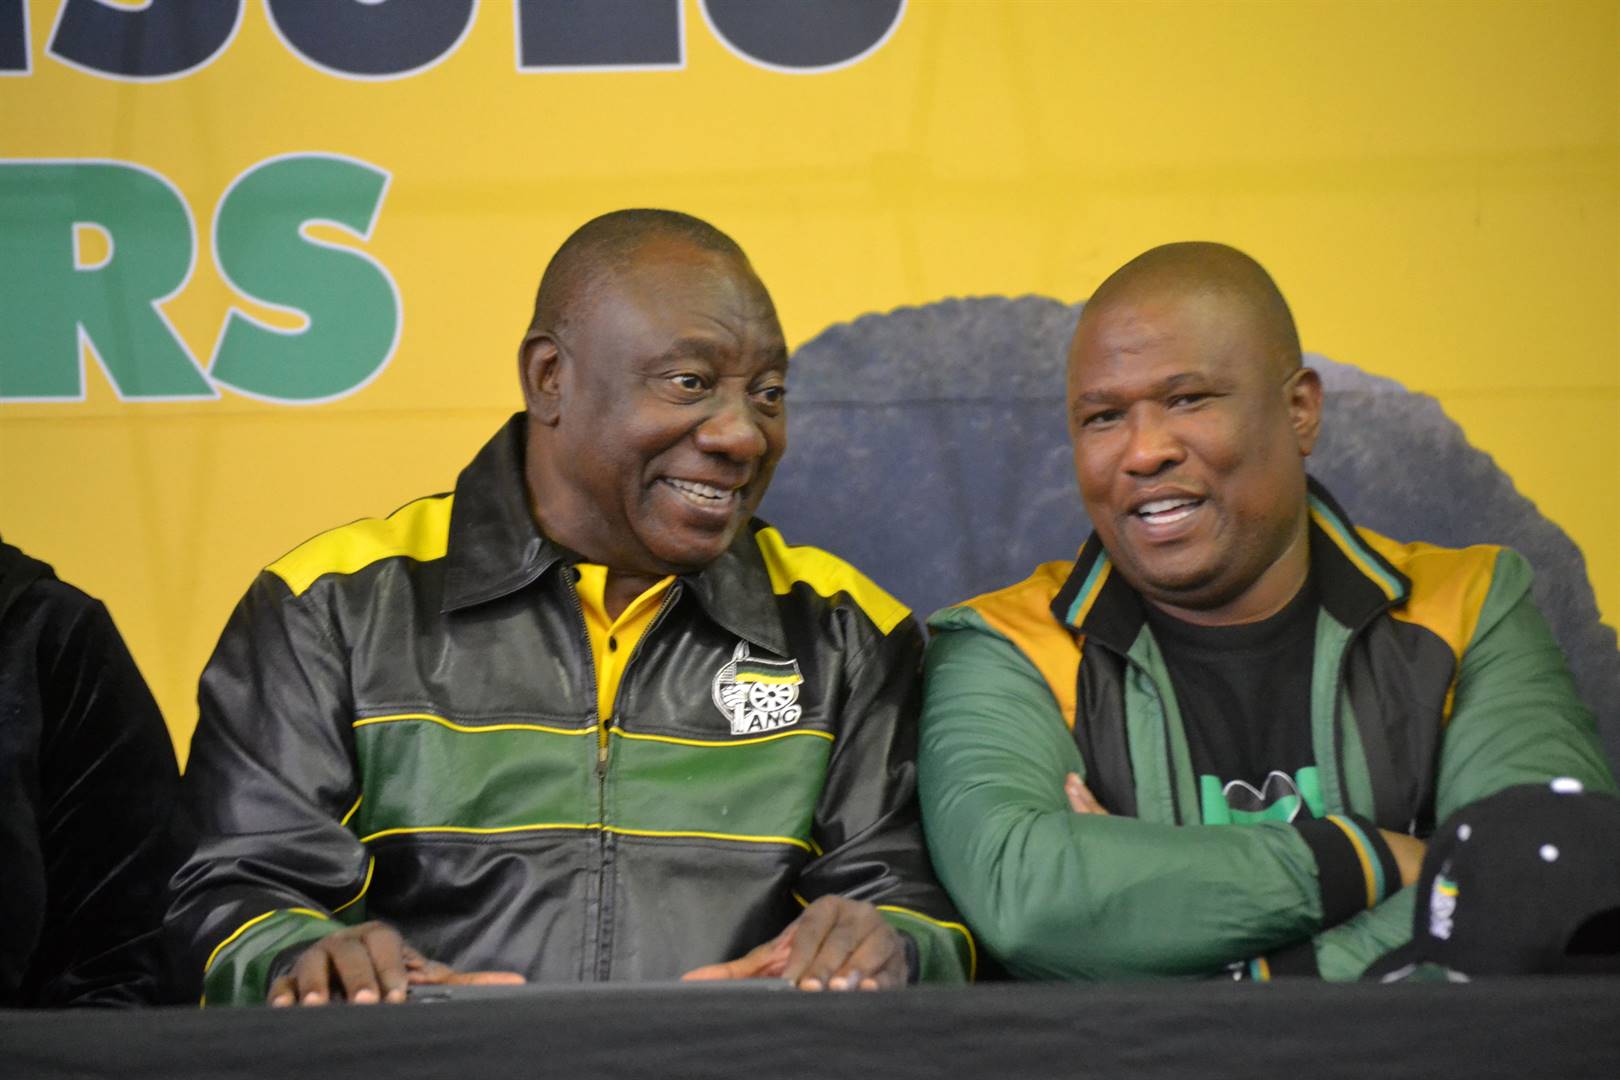 ANC President Cyril Ramaphosa and provincial chairperson Oscar Mabuyane shared a light moment during his campaign in Port Elizabeth. Picture: Luvuyo Mehlwana